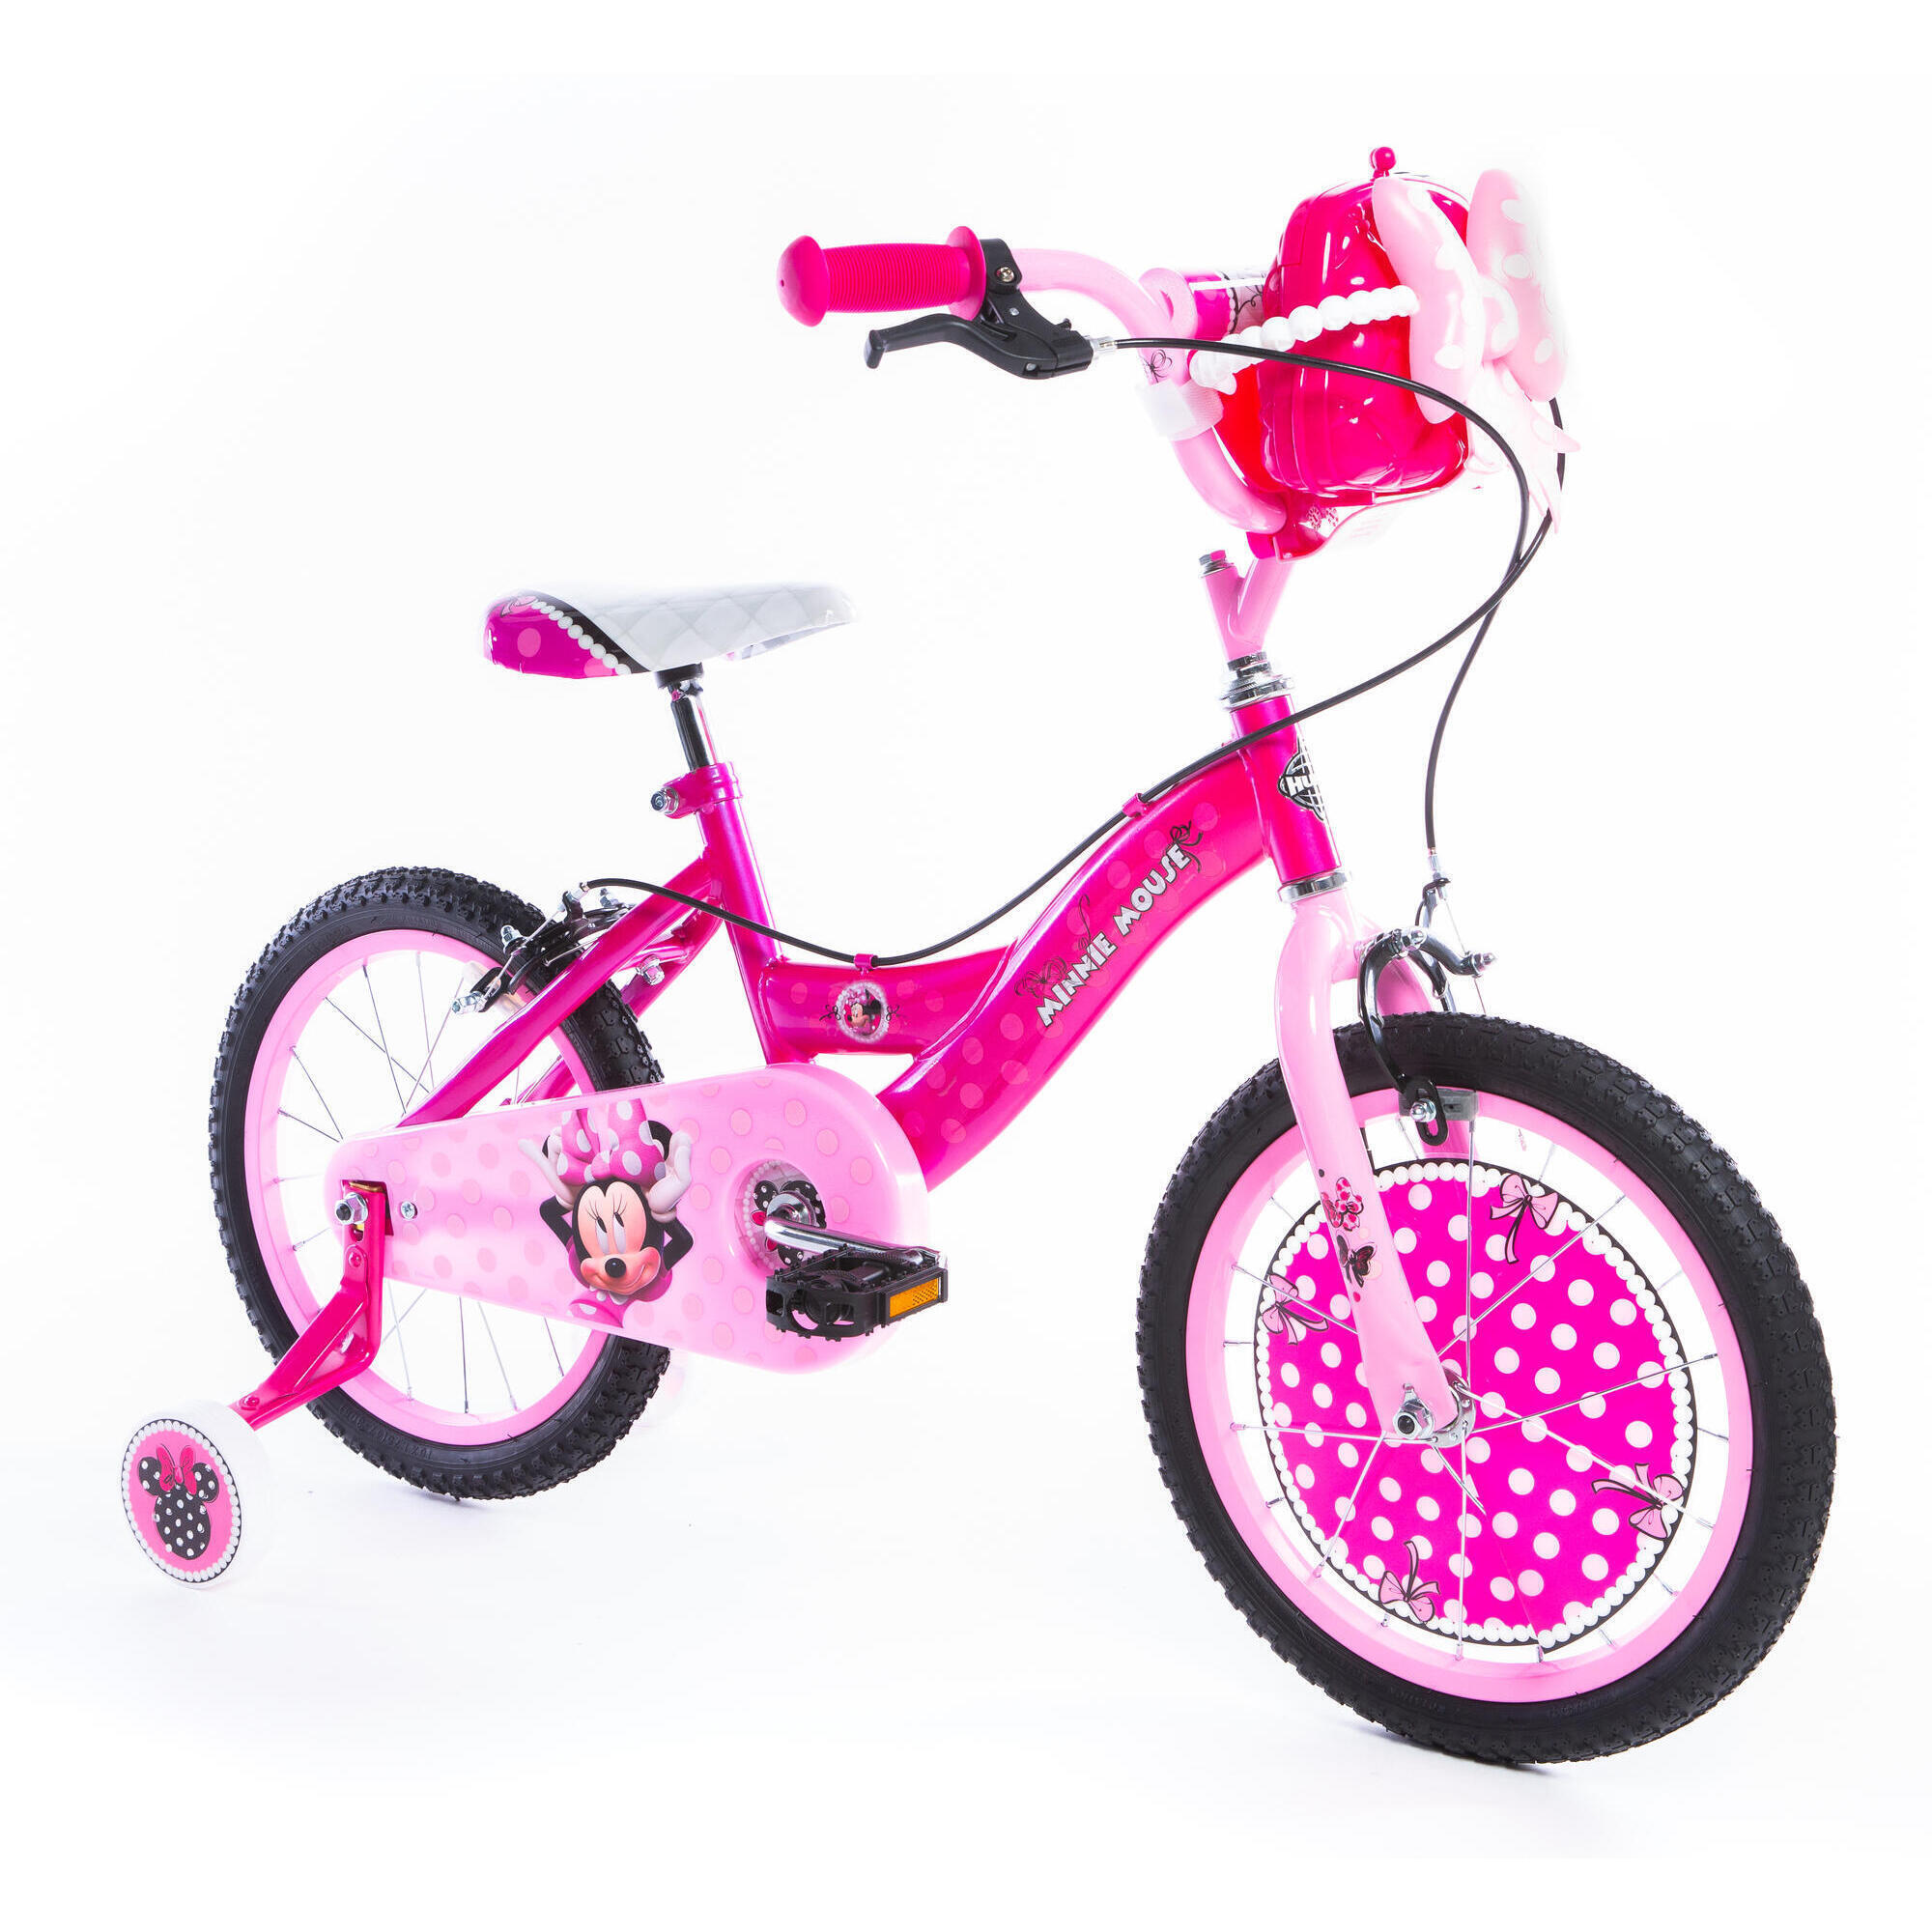 HUFFY Huffy Disney Minnie Mouse Kids Bike 16 Inch Pink For 5-7 Year Old + stabilisers